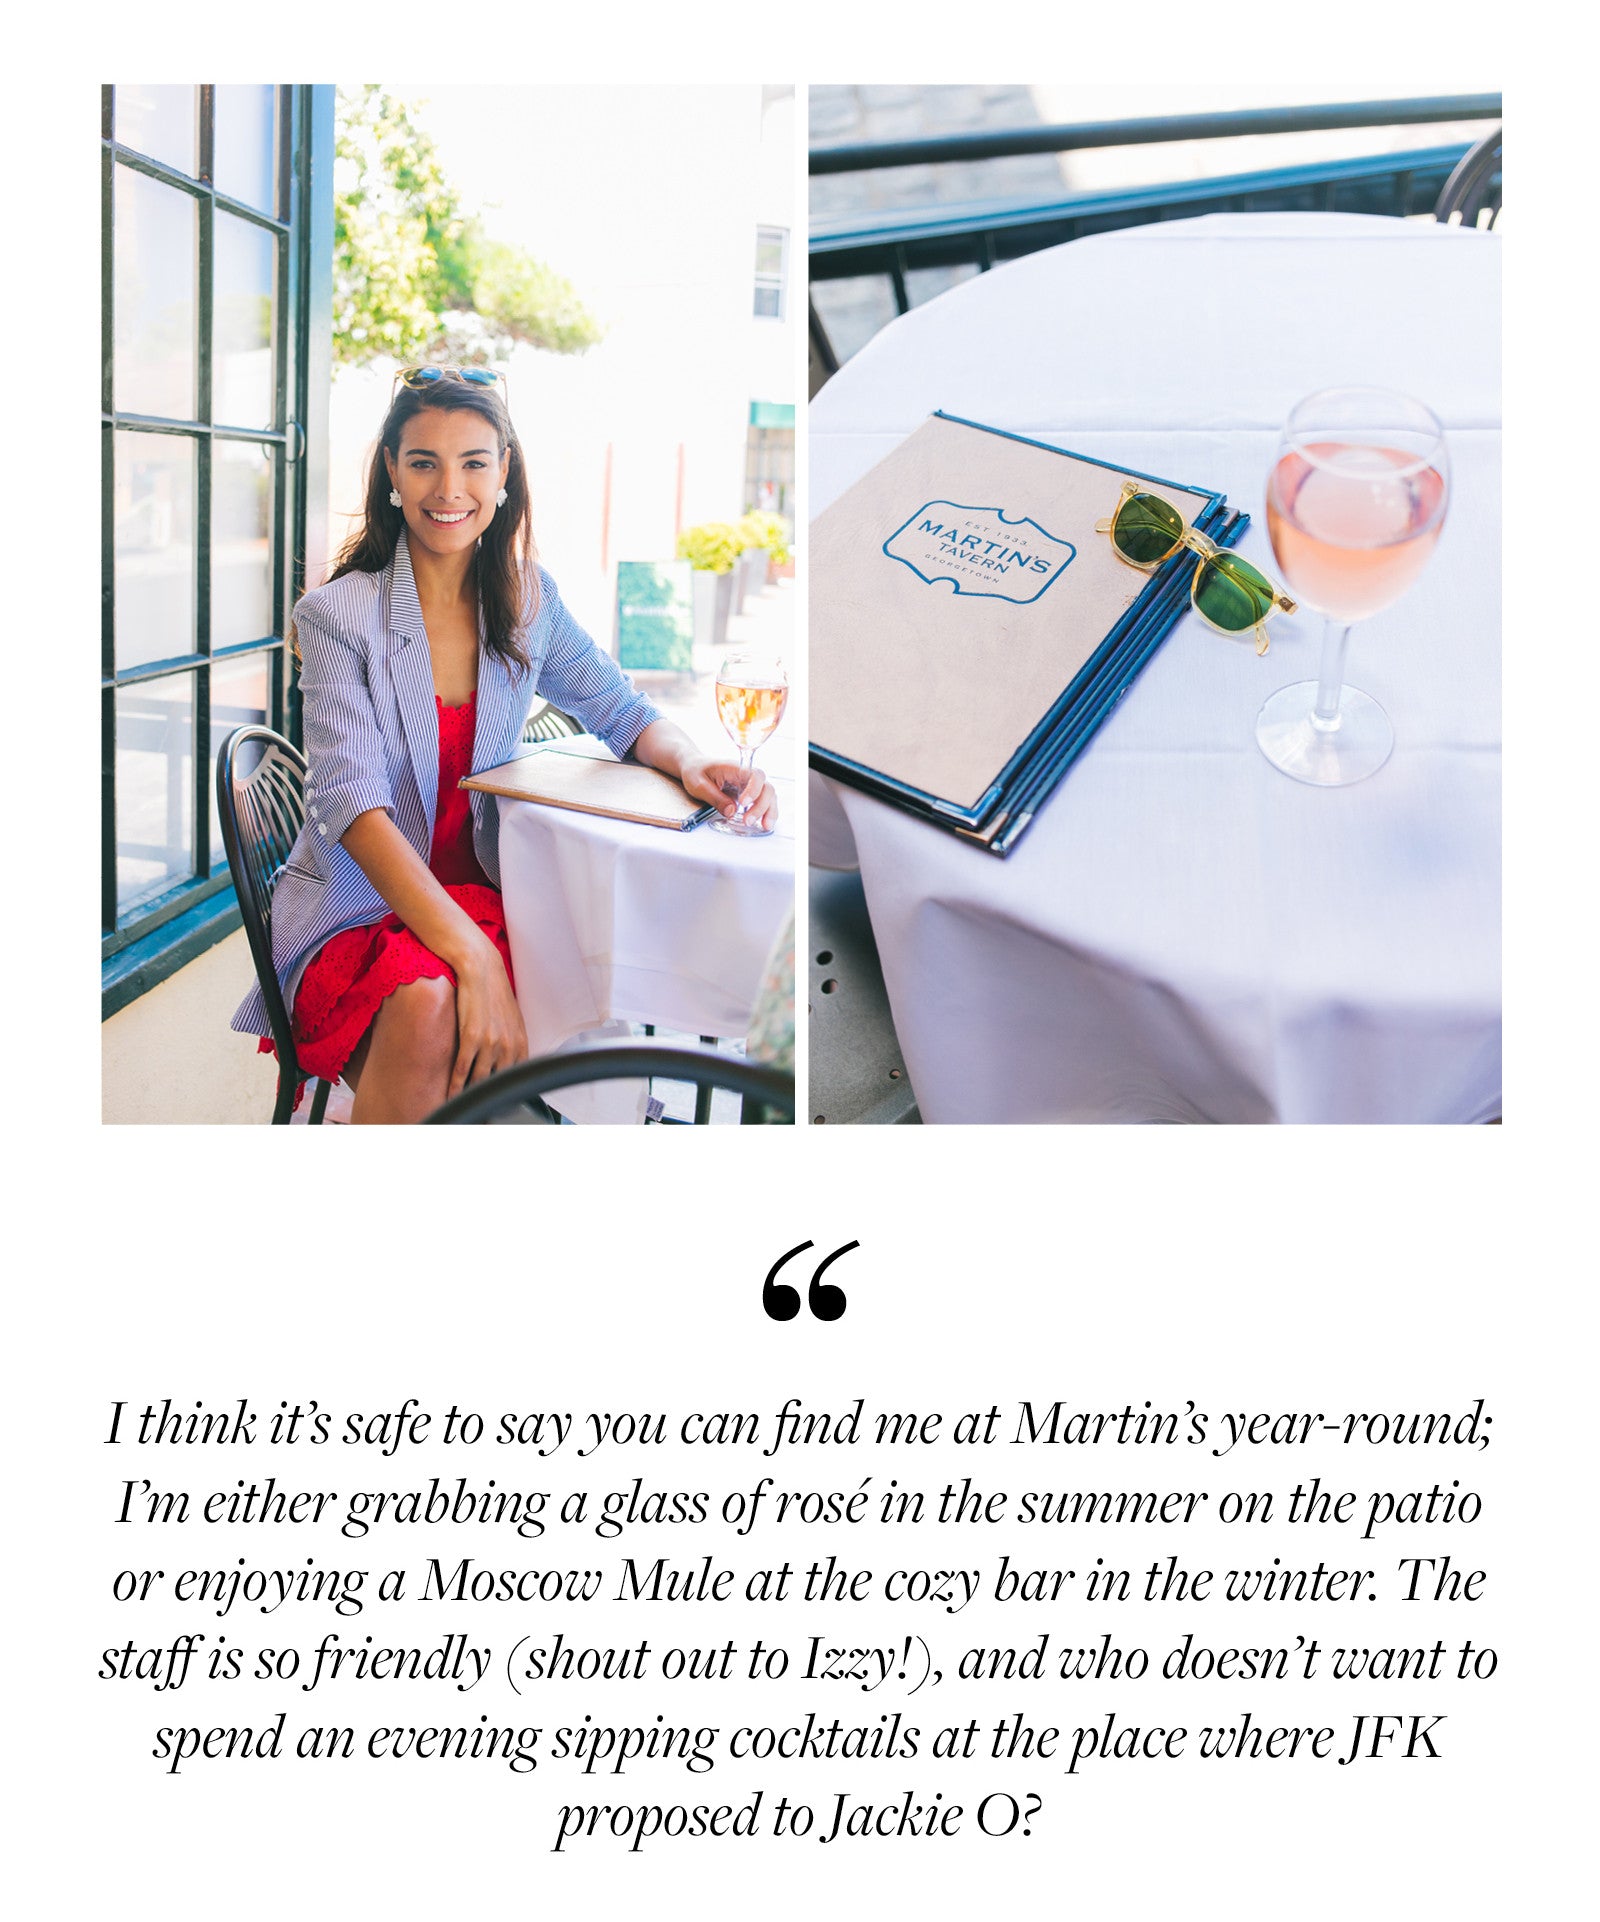 I think it’s safe to say you can find me at Martin’s year-round; I’m either grabbing a glass of rosé in the summer on the patio or enjoying a Moscow Mule at the cozy bar in the winter. The staff is so friendly (shout out to Izzy!), and who doesn’t want to spend an evening sipping cocktails at the place where JFK  proposed to Jackie O?